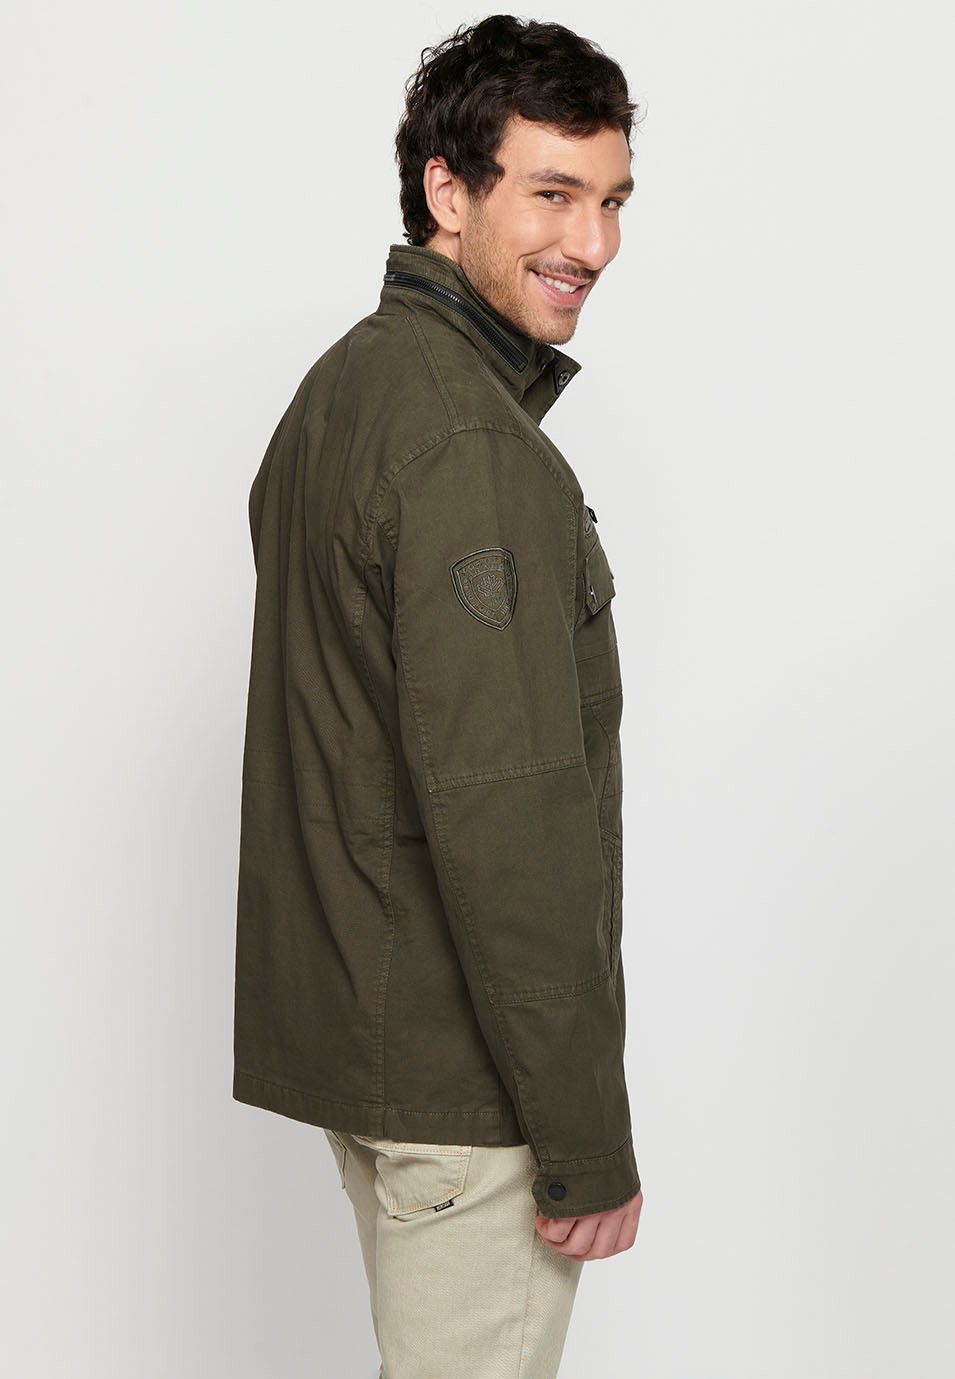 Long Jacket with Zipper Front Closure and Lapel with Stand Collar and Flap Pockets in Olive Color for Men 5